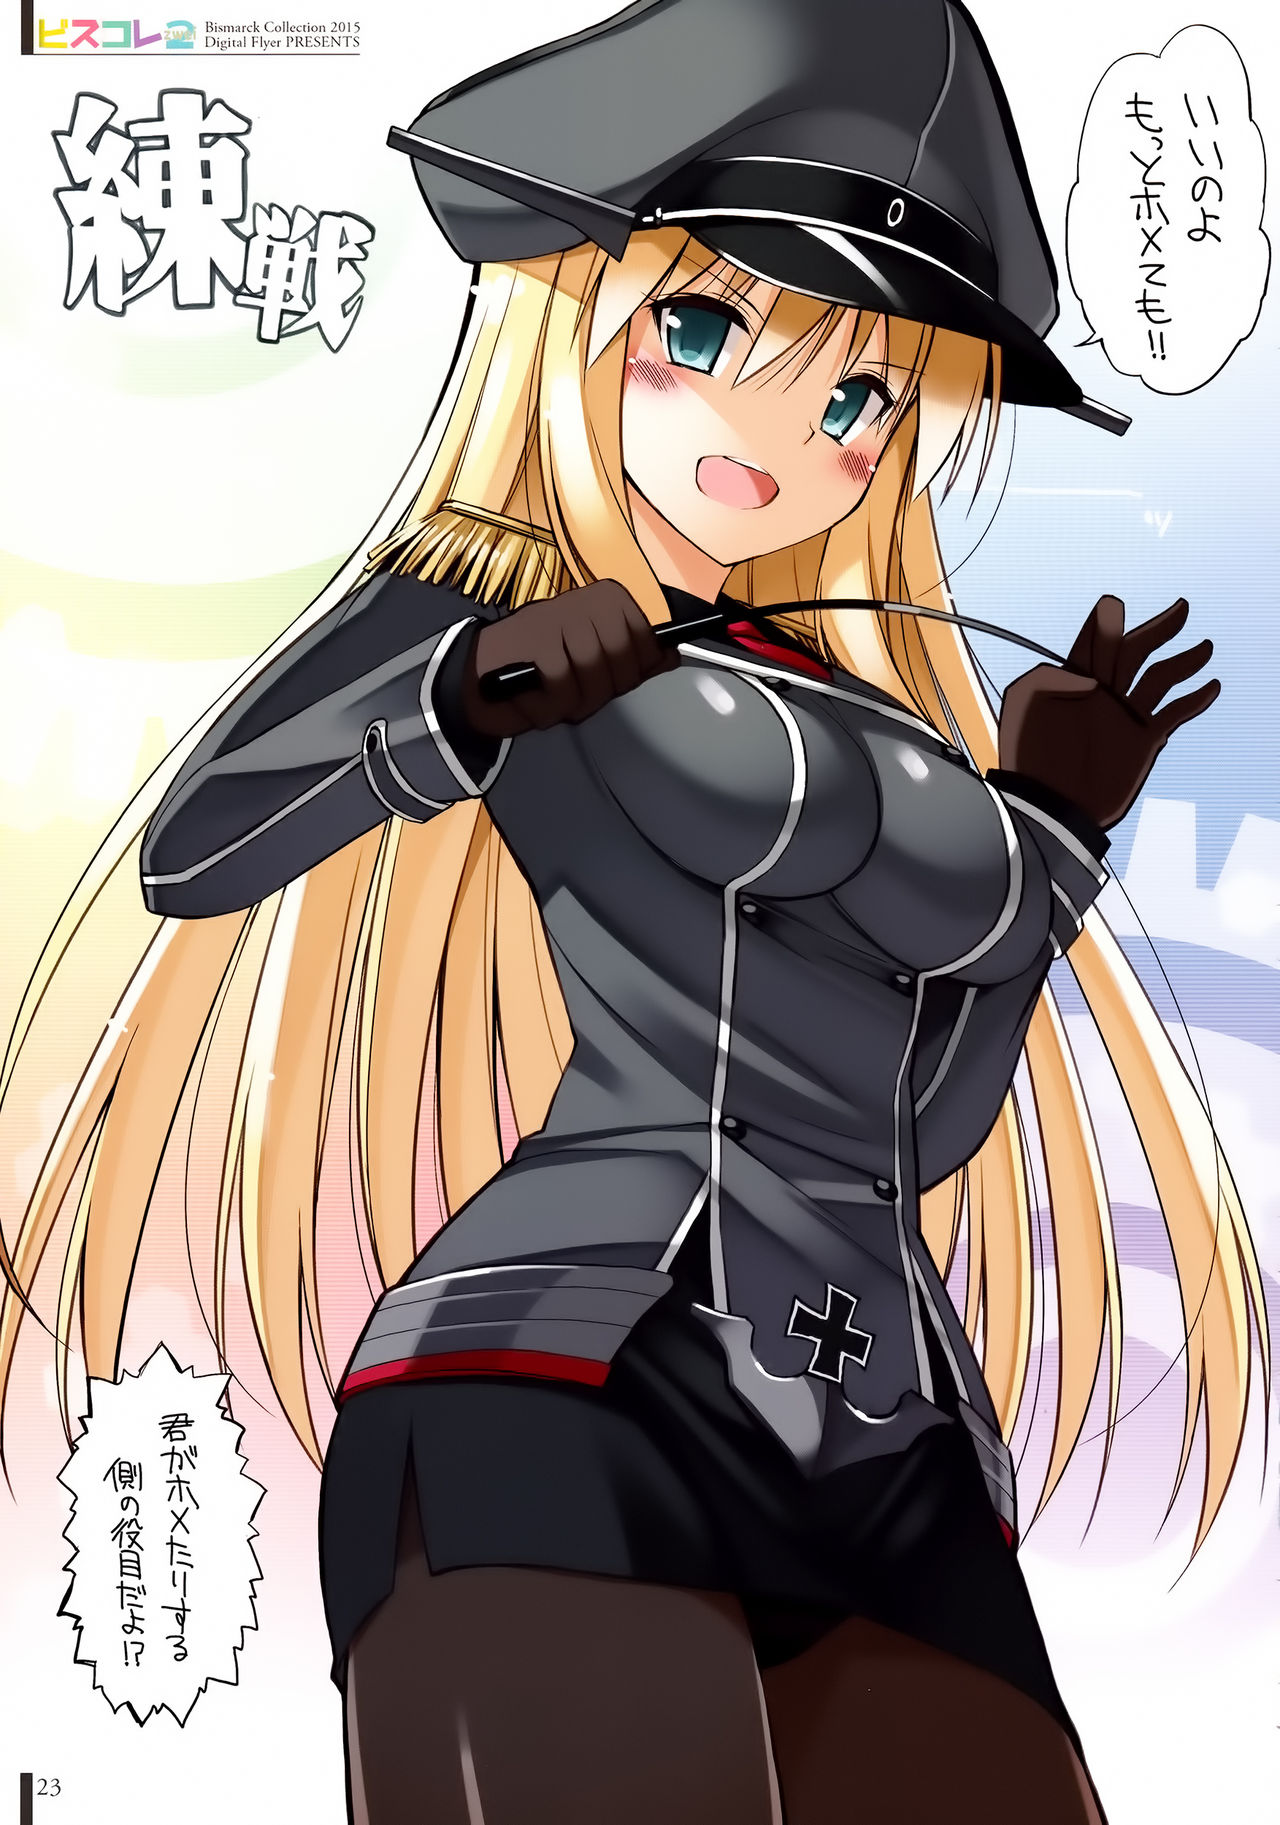 (C89) [Digital Flyer (Oota Yuuichi)] BisColle Zwei -Bismarck Collection 2015- (Kantai Collection -KanColle-) page 23 full